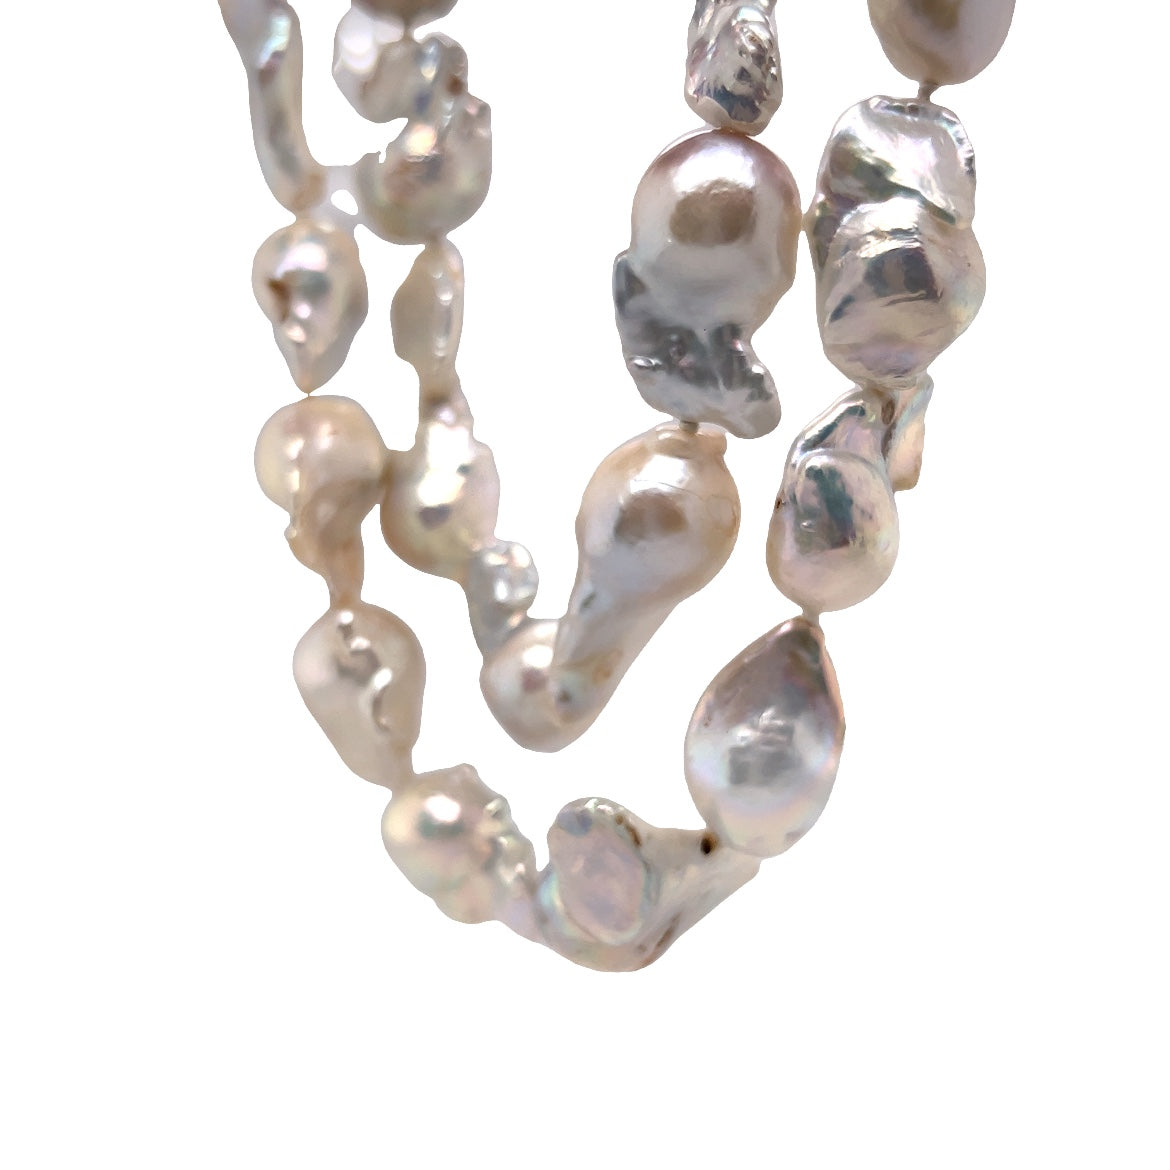 Baroque Freshwater Pearl Necklace in 14k Yellow GoldComposition: 14 Karat Yellow Gold Total Gram Weight: 188.0 g